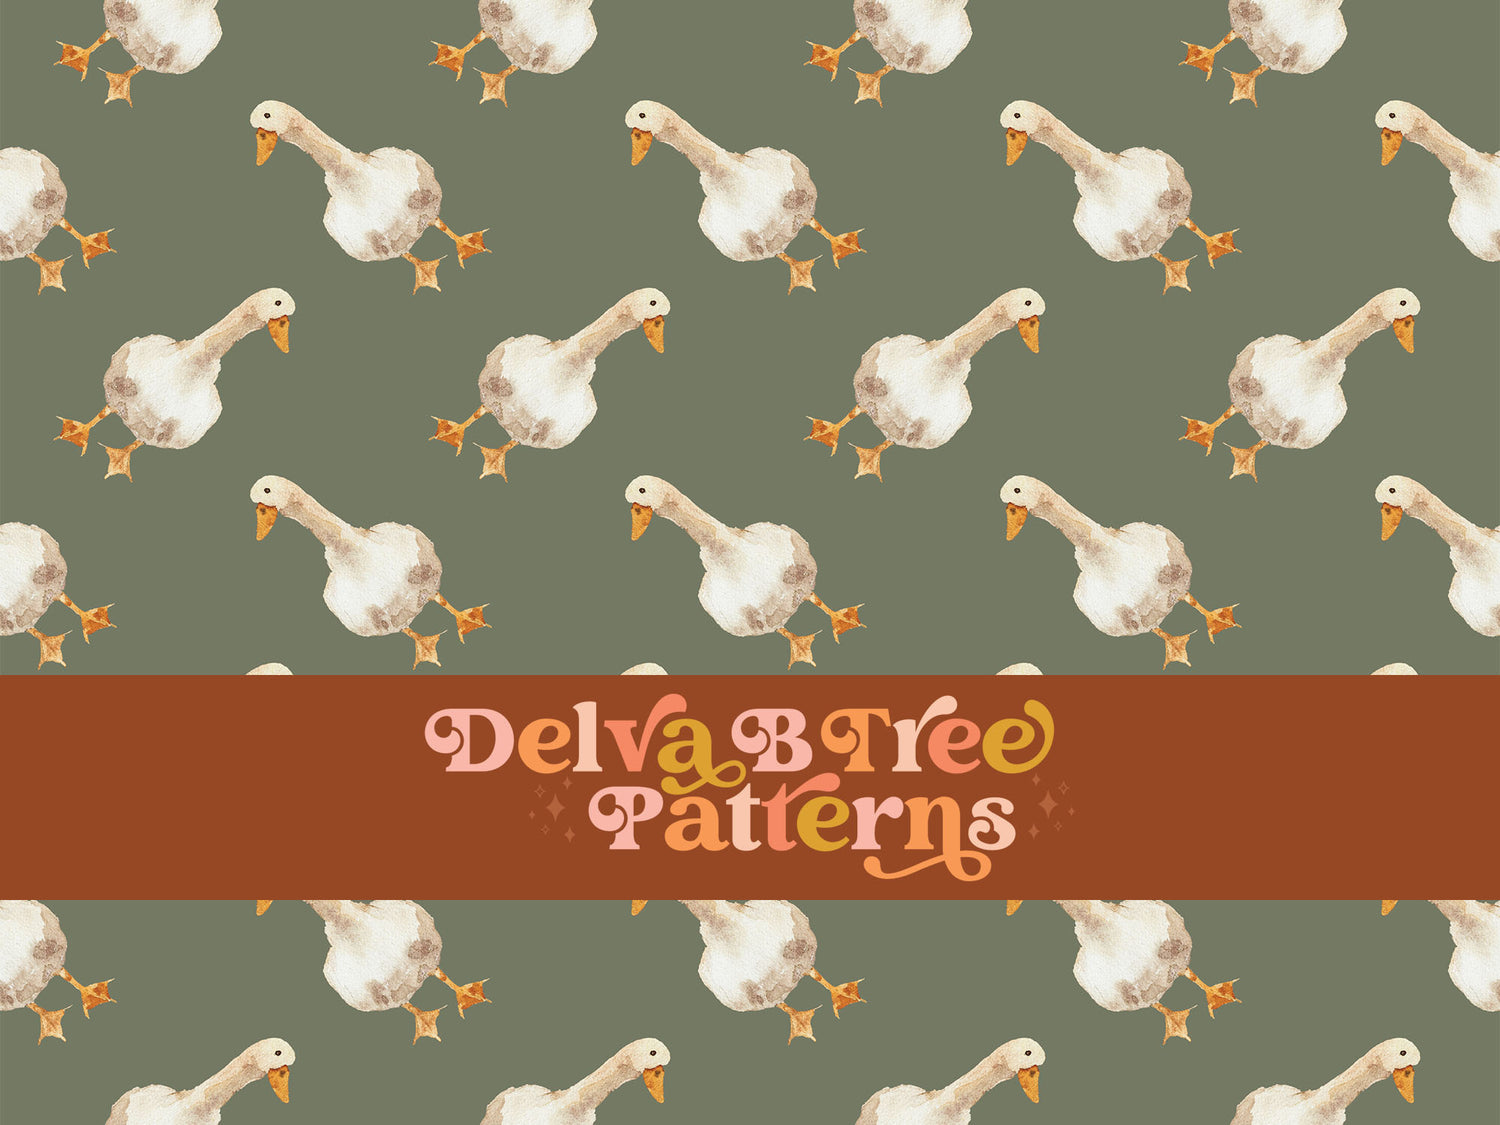 Watercolor geese on a camouflage green background seamless file for fabric printing. Gender Neutral retro looking goose repeat pattern for textiles, polymailers, baby boy lovey blankets, nursery crib bedding, kids clothing, girls hair accessories, home decor accents, pet products.